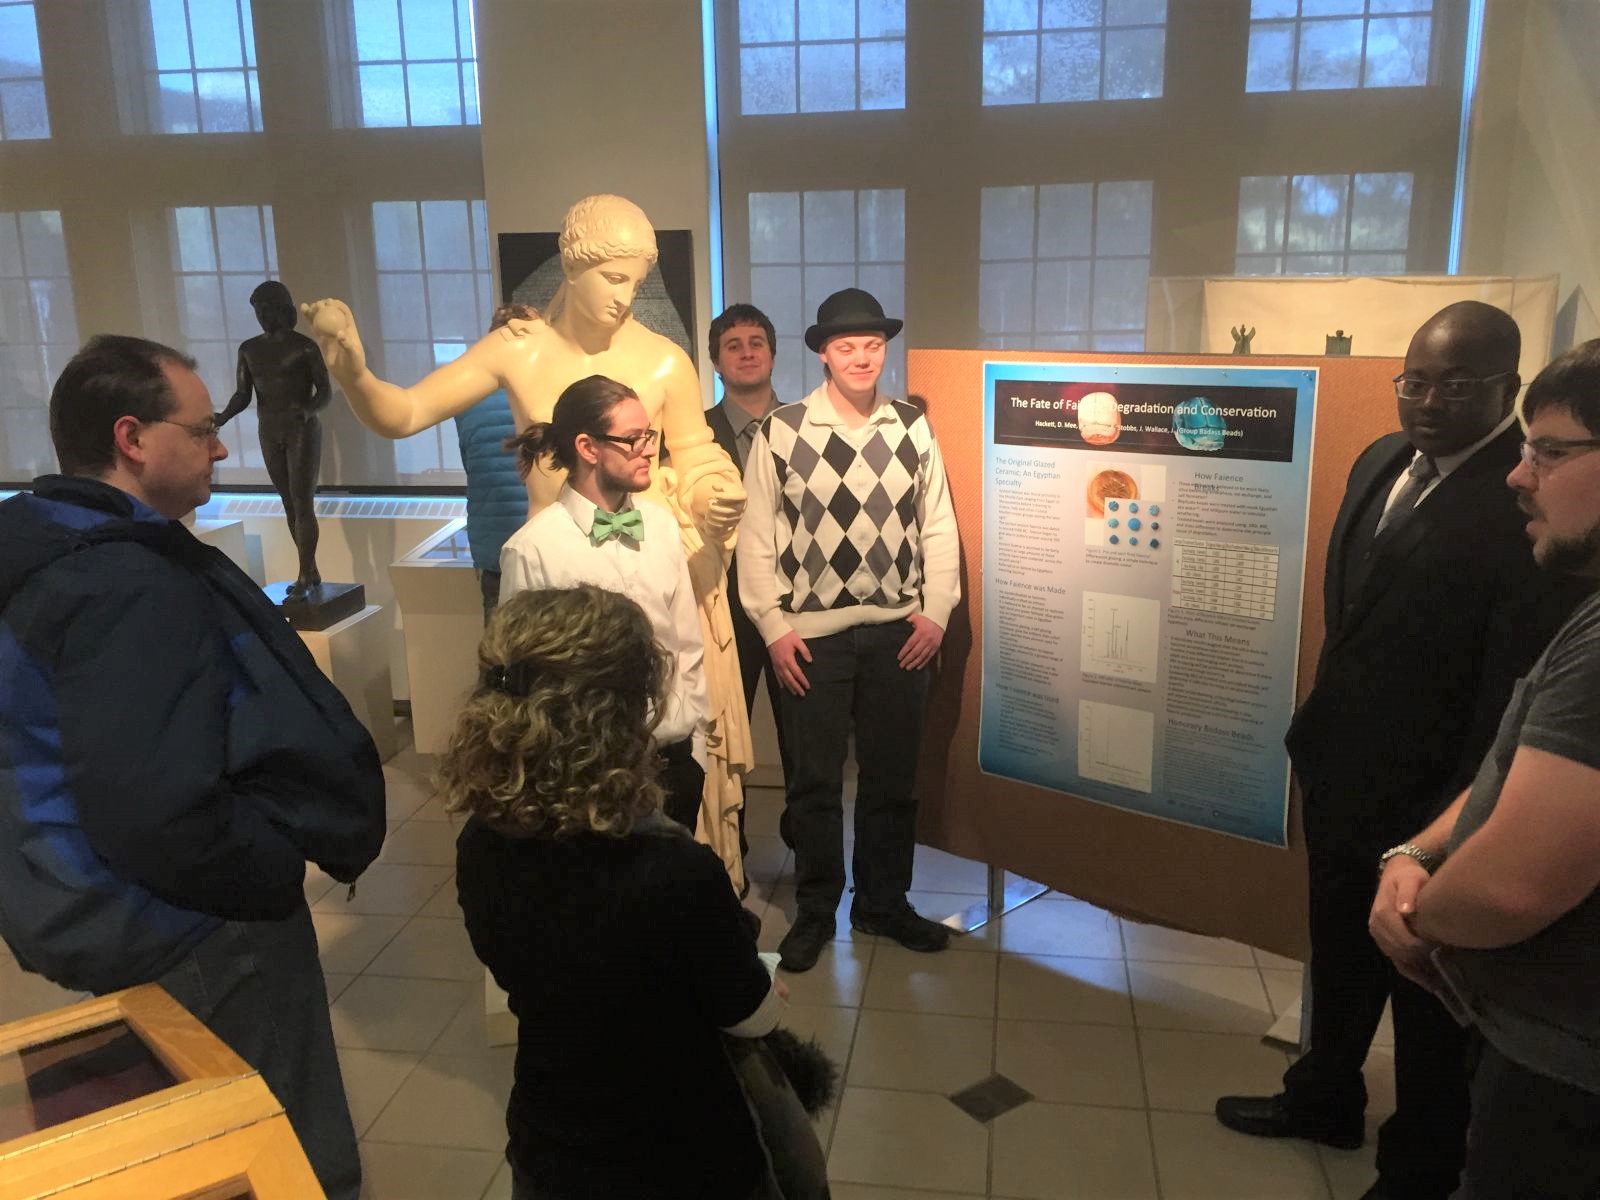 Undergraduate students presenting their science posters and synchrotron research to CLS staff members, as part of the post-secondary programs with the Education Team.